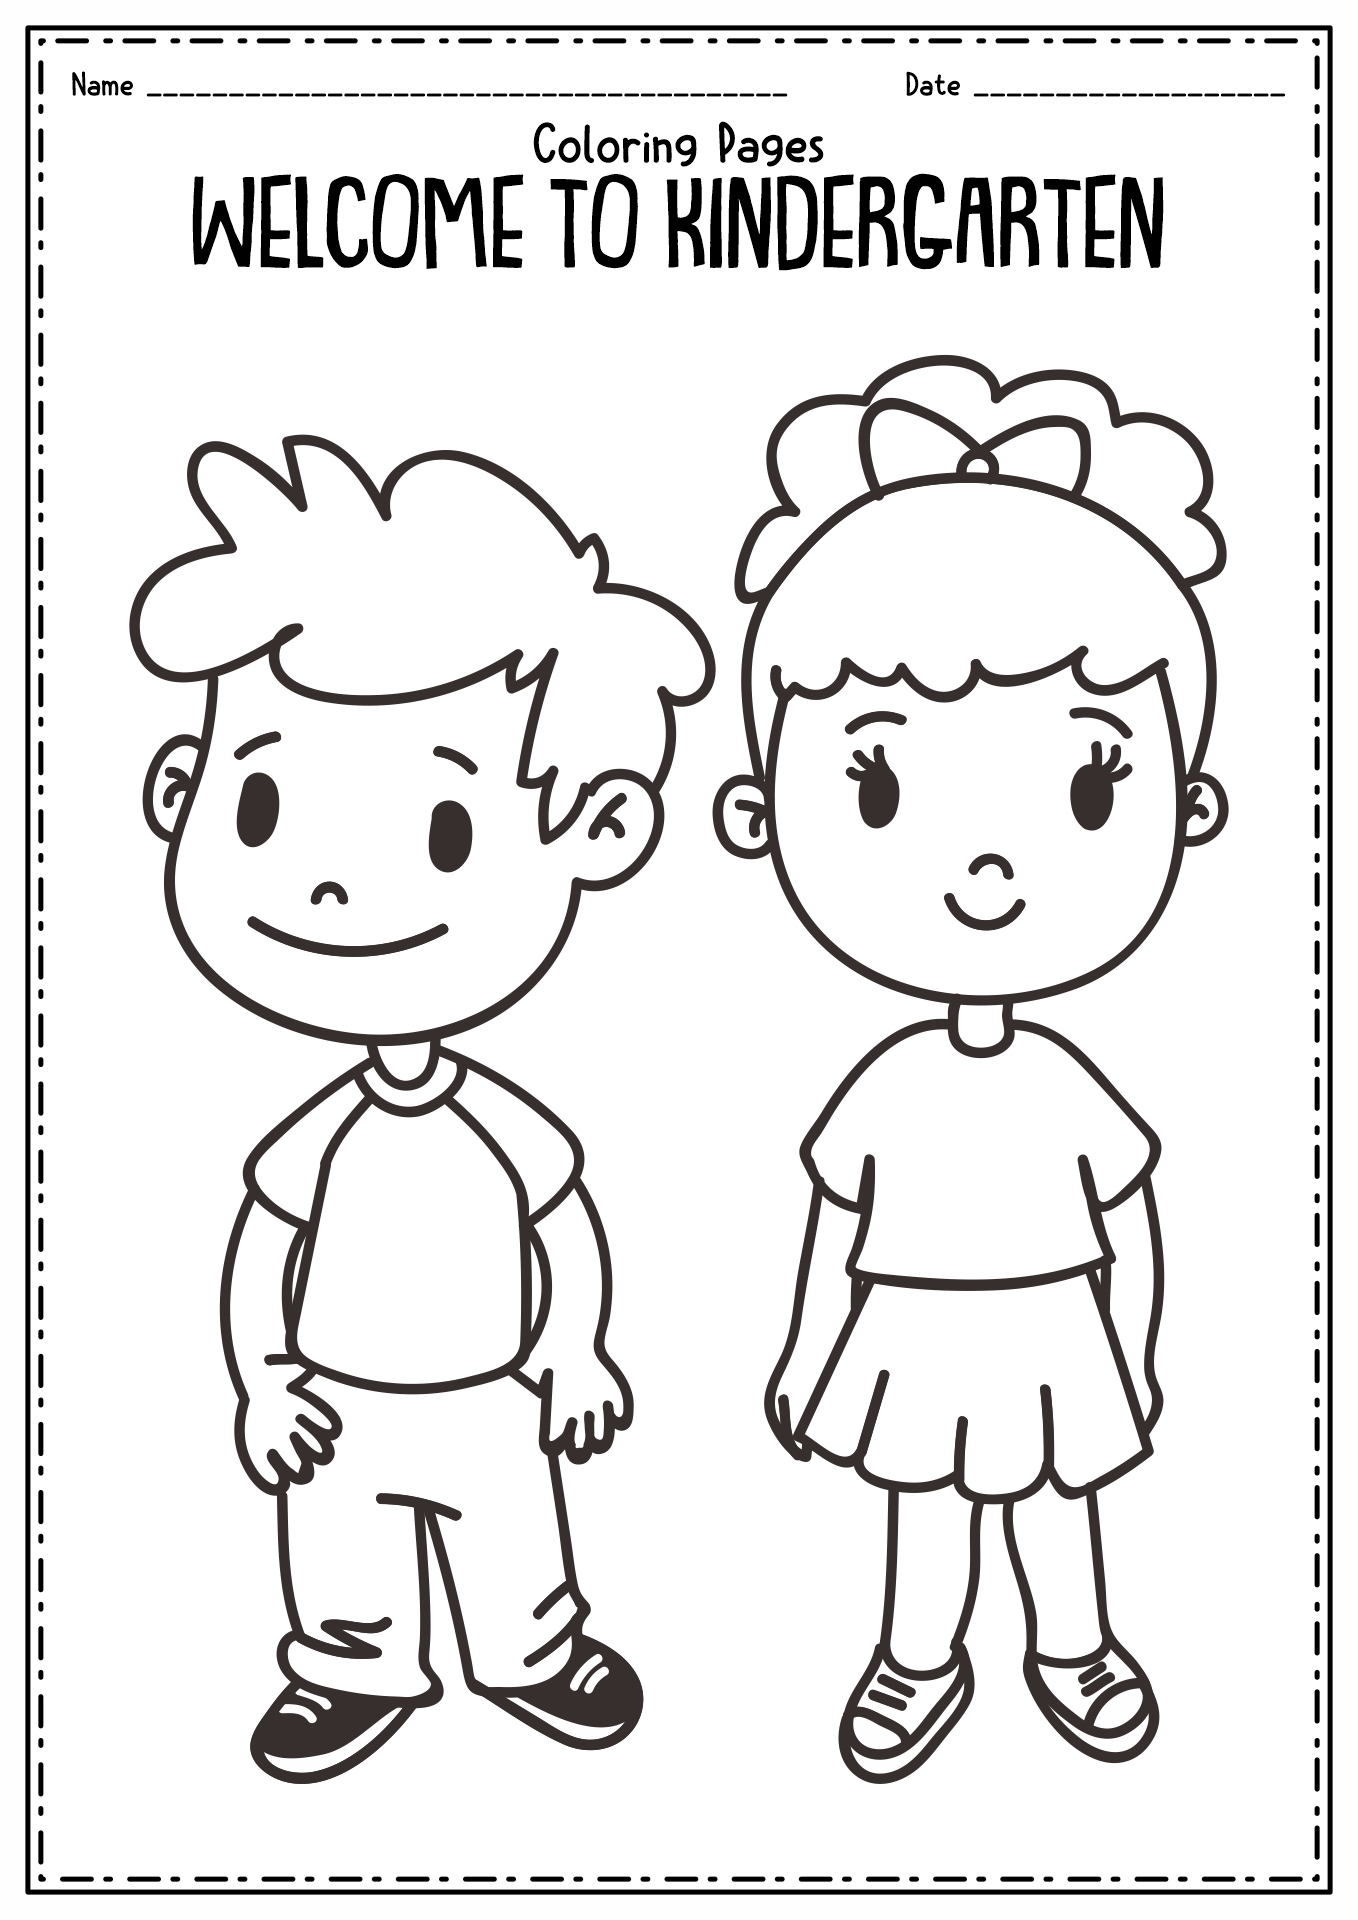 11-best-images-of-first-day-of-kindergarten-school-worksheets-first-day-of-school-activity